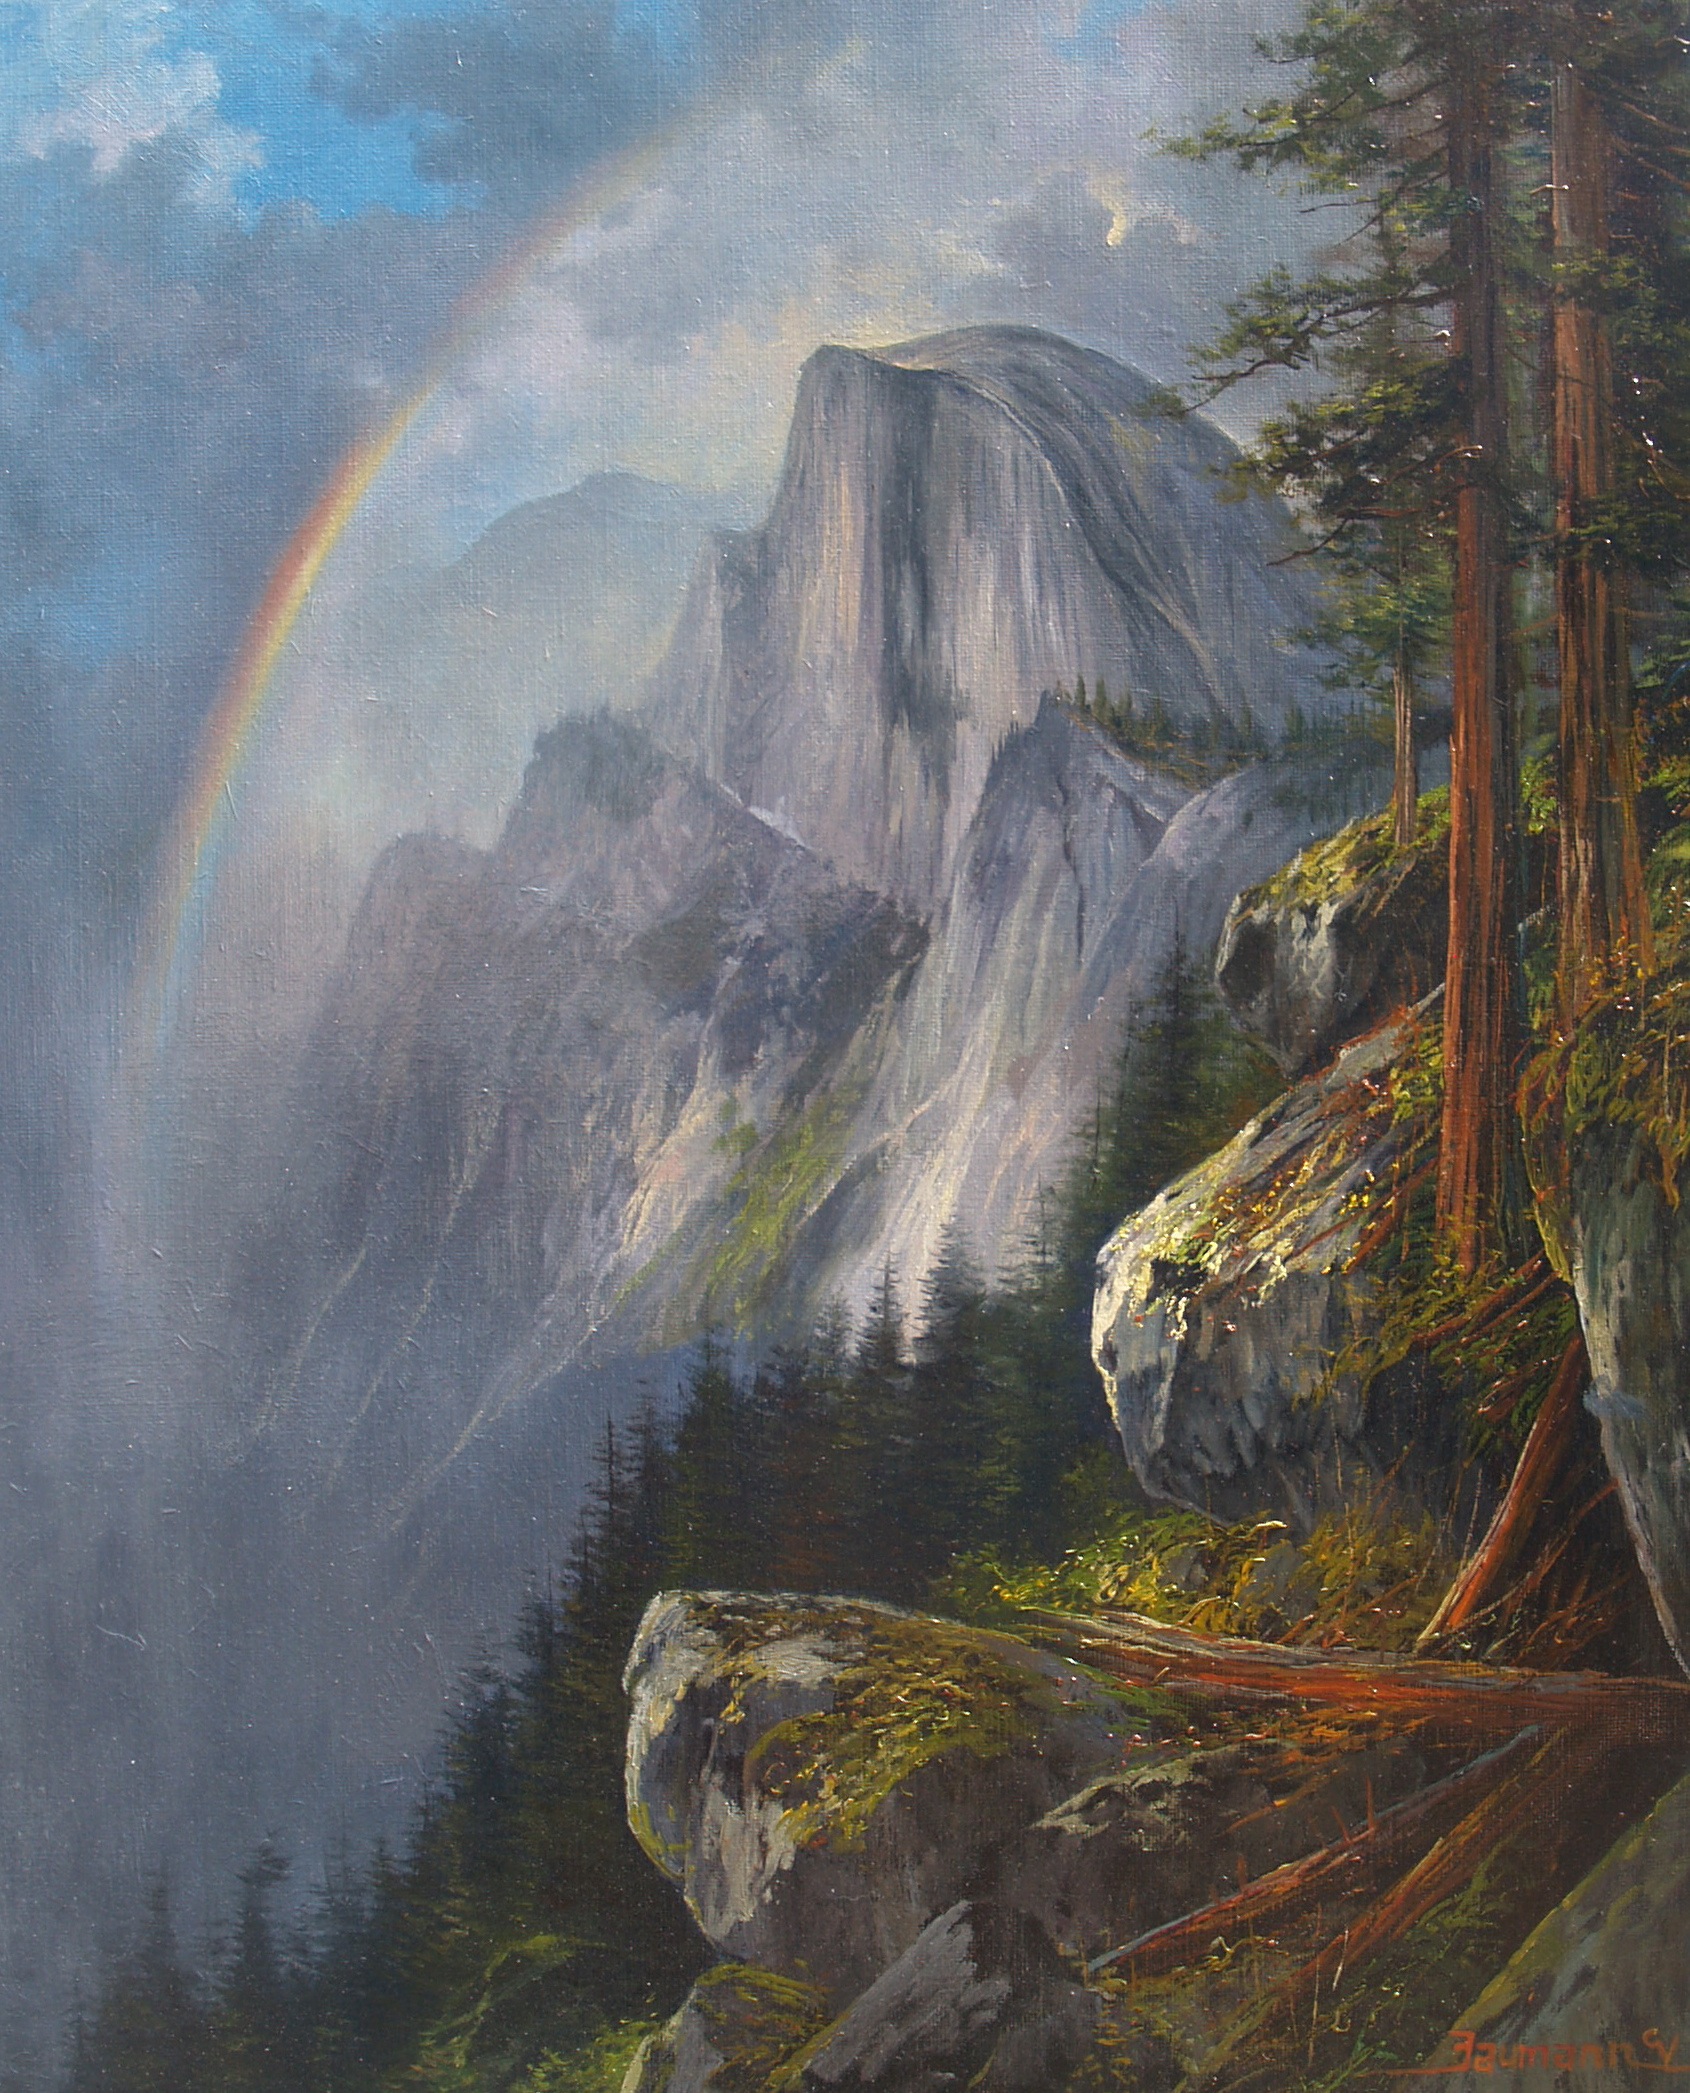 Yosemite Half Dome: After the Storm